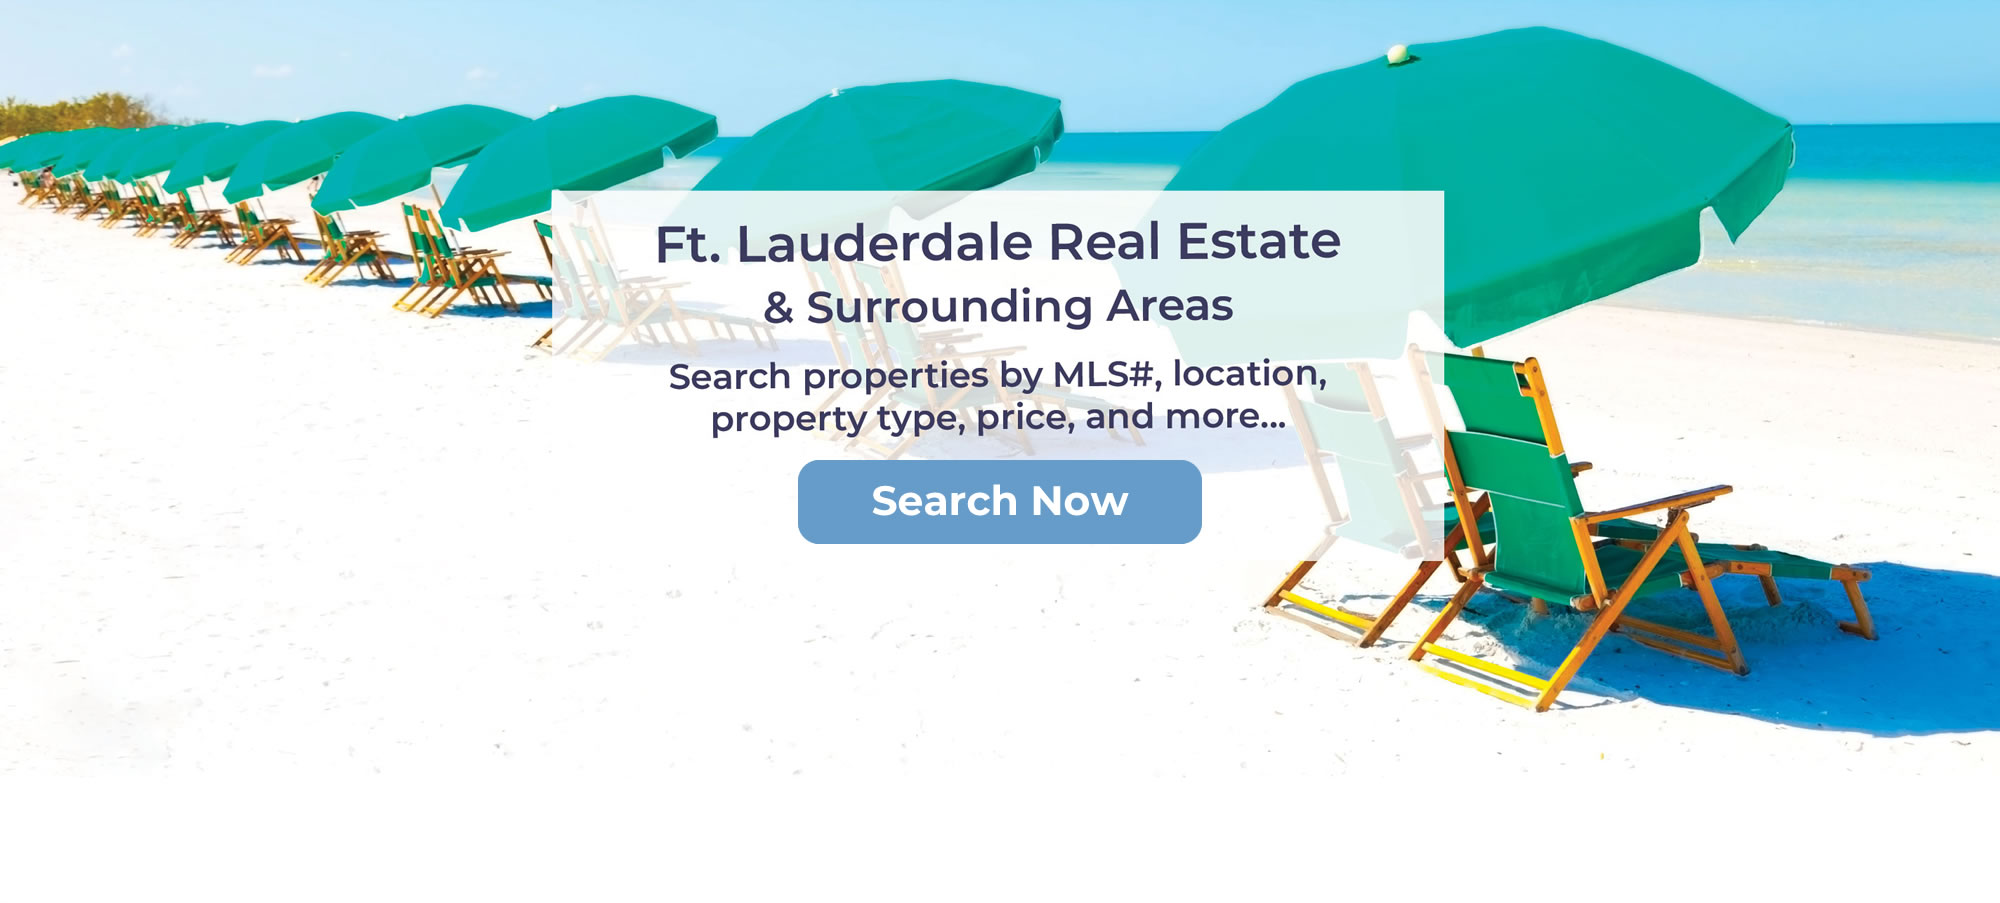 Ft. Lauderdale Real Estate & Surrounding Areas: Search Properties by MLS#, location, property type, price, and more... - Search Now